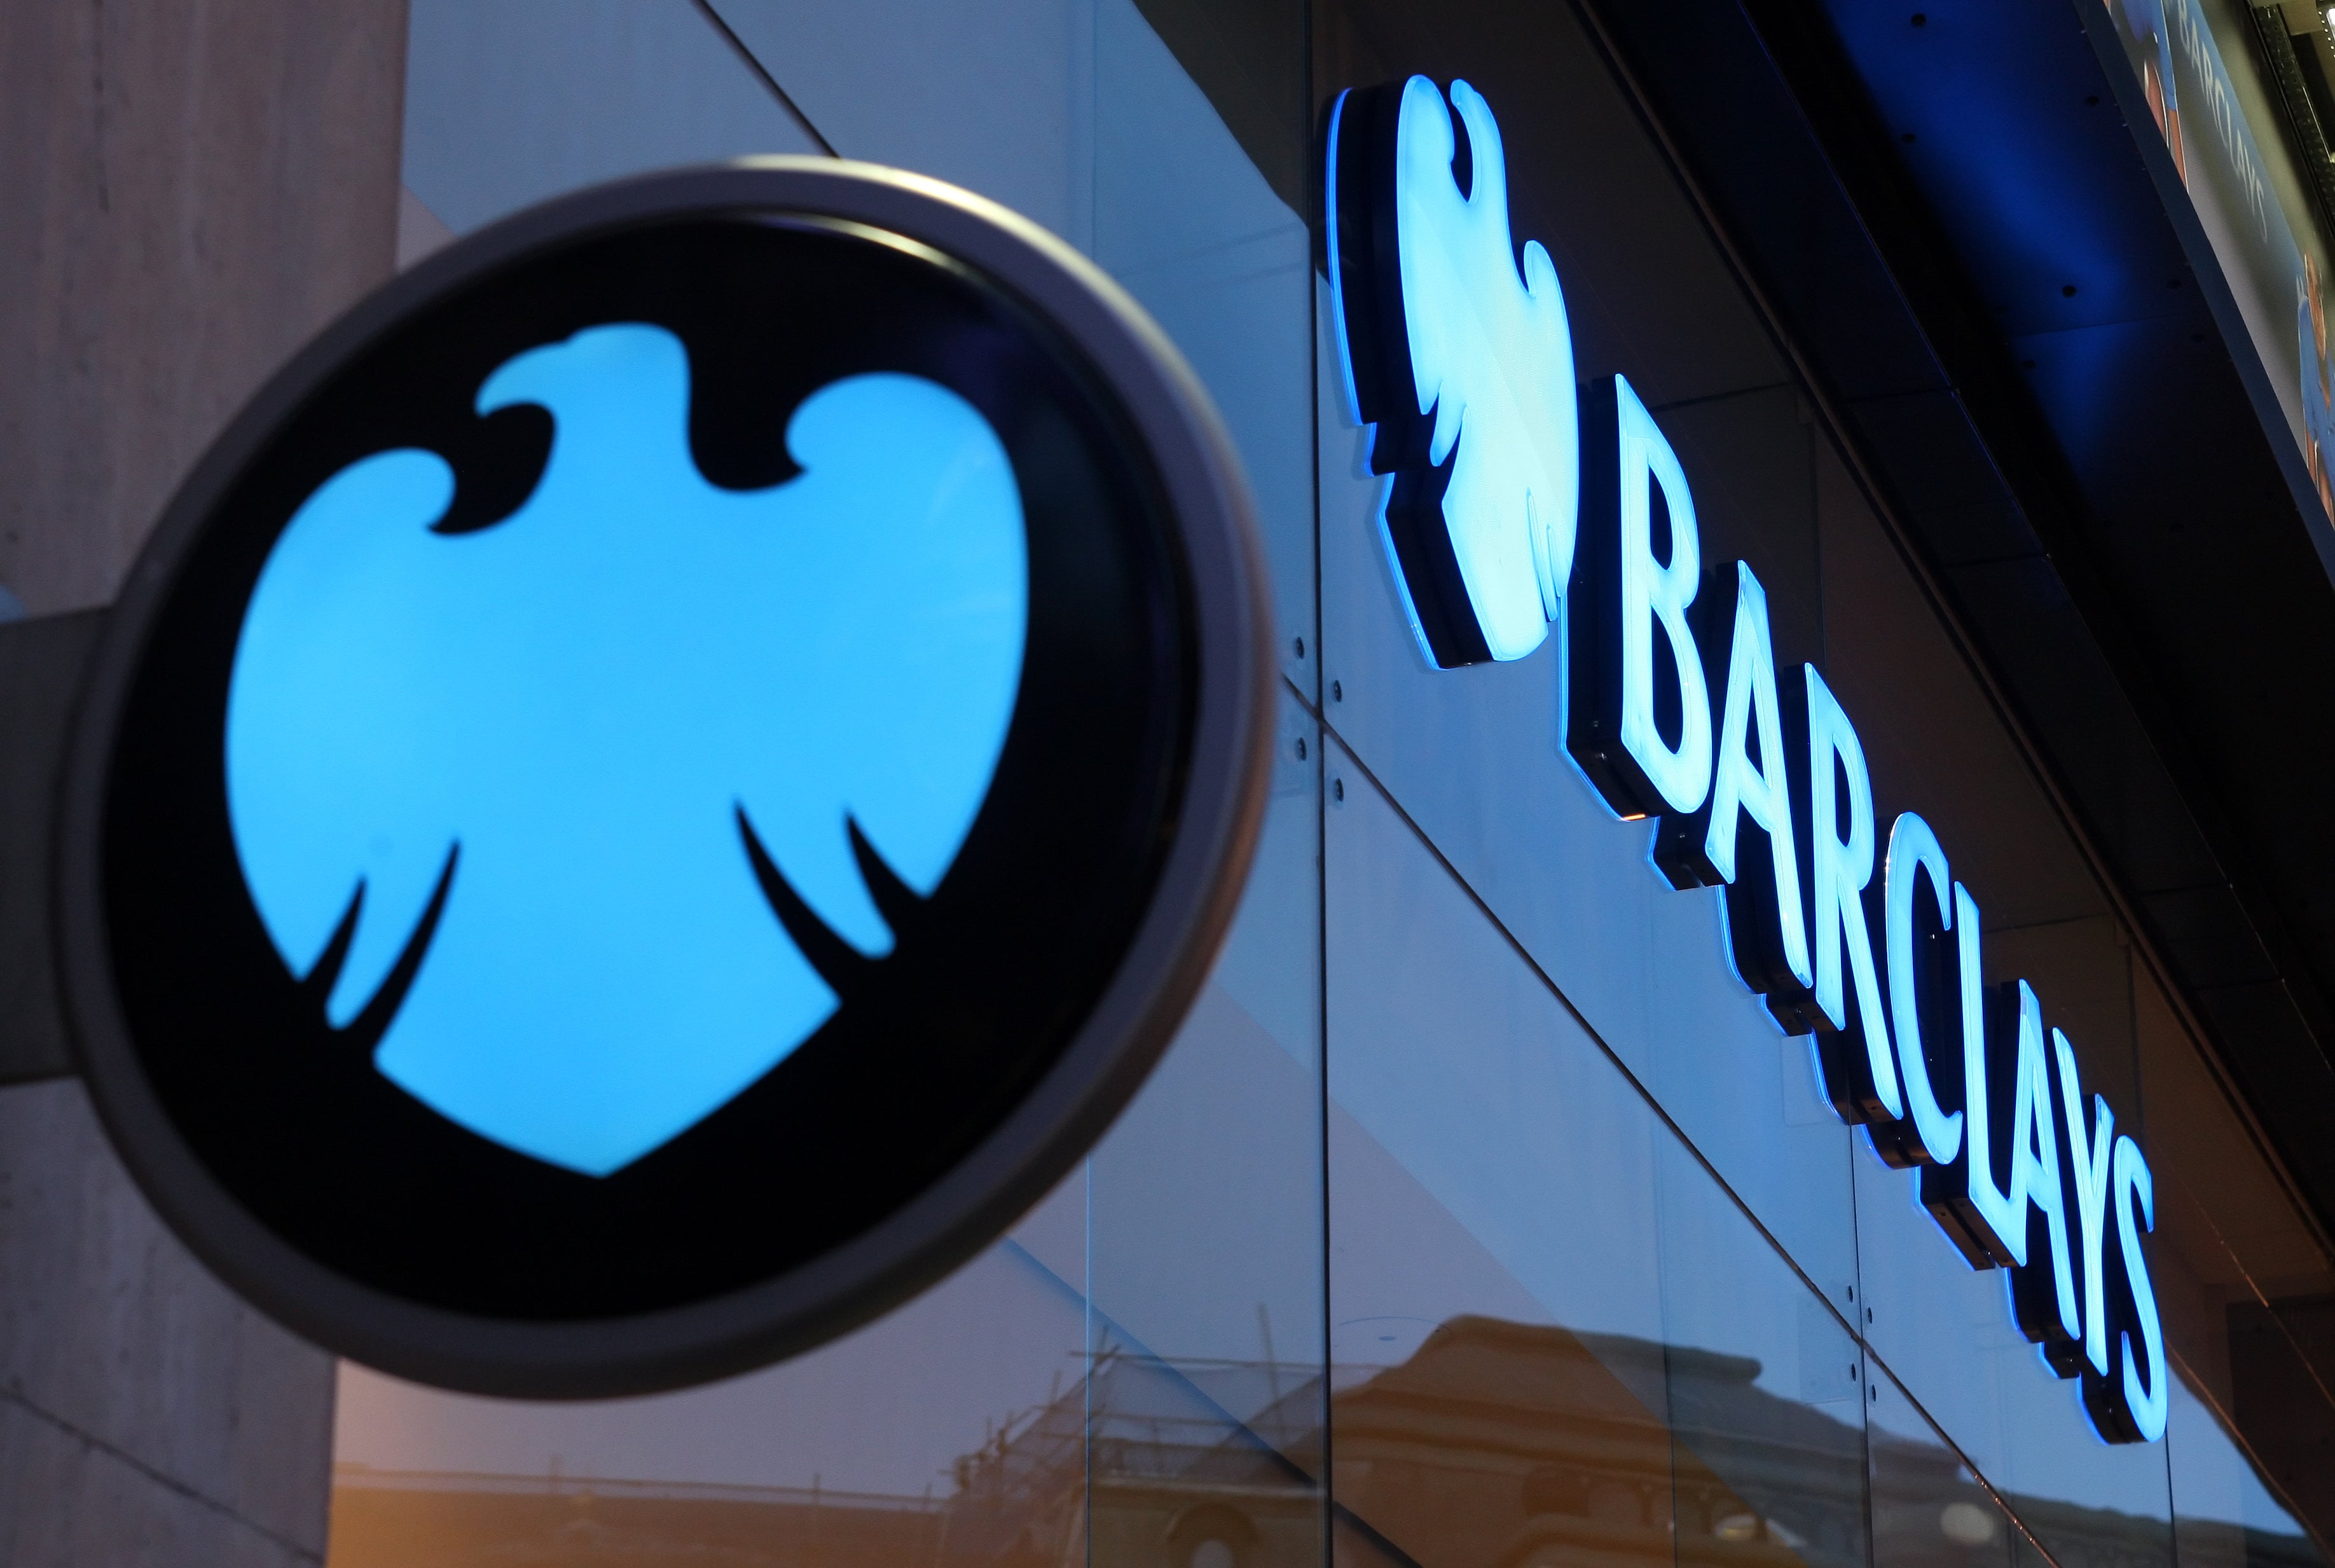 A Barclays branch